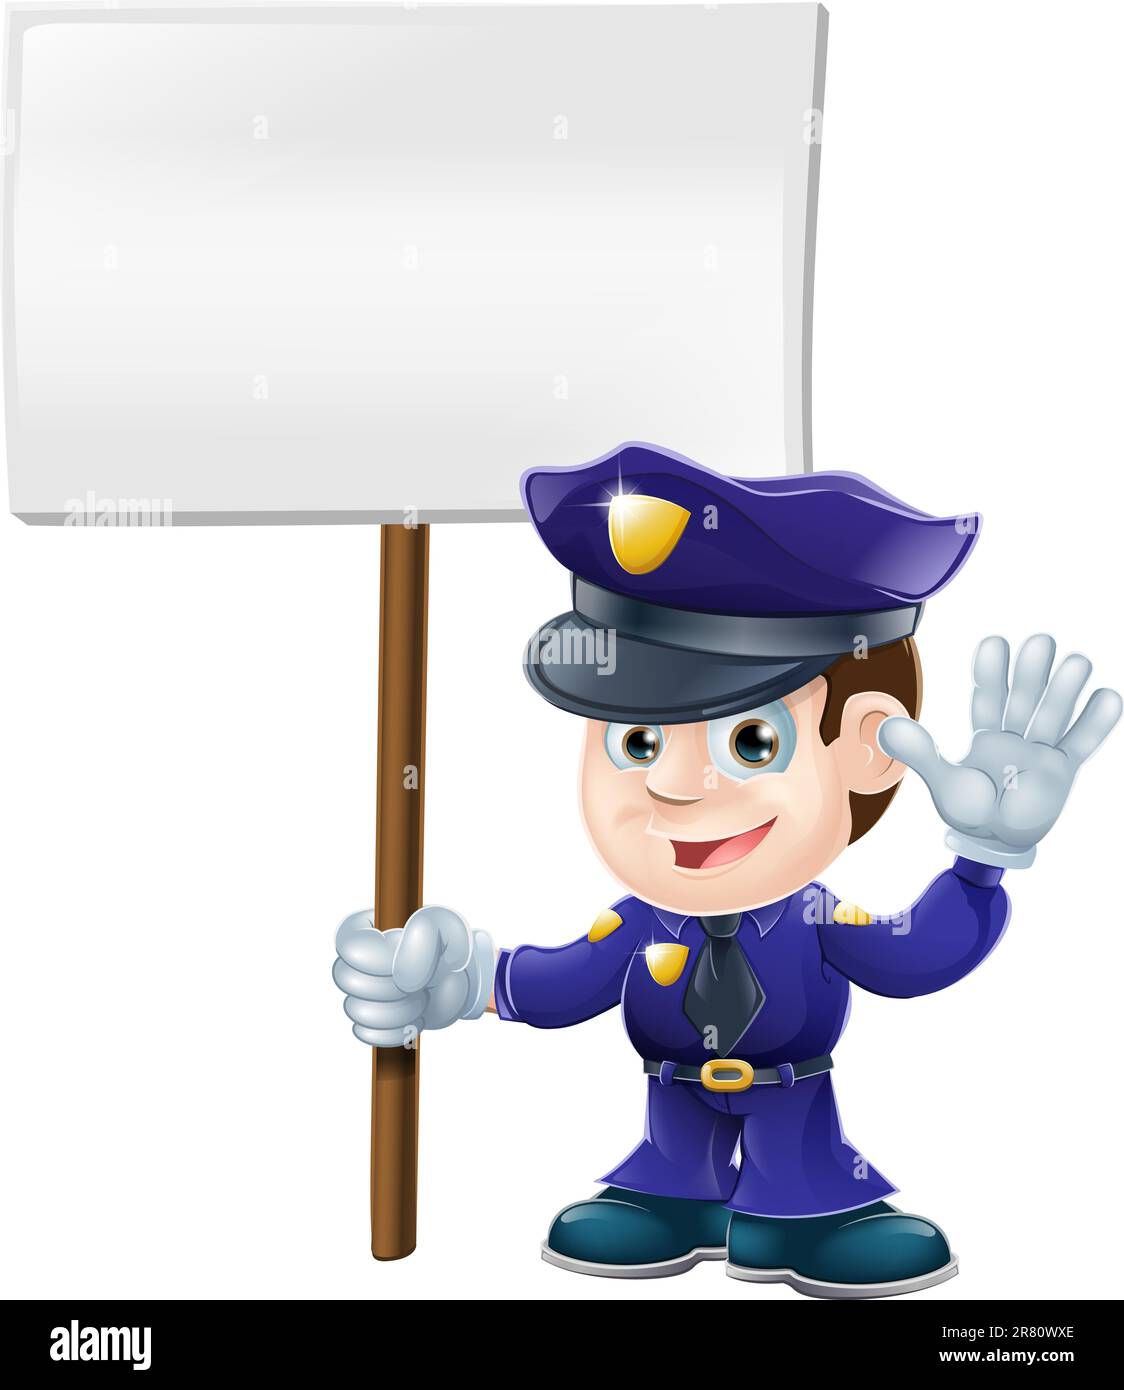 Illustration of a cute police character waving or saying stop and holding message sign Stock Vector